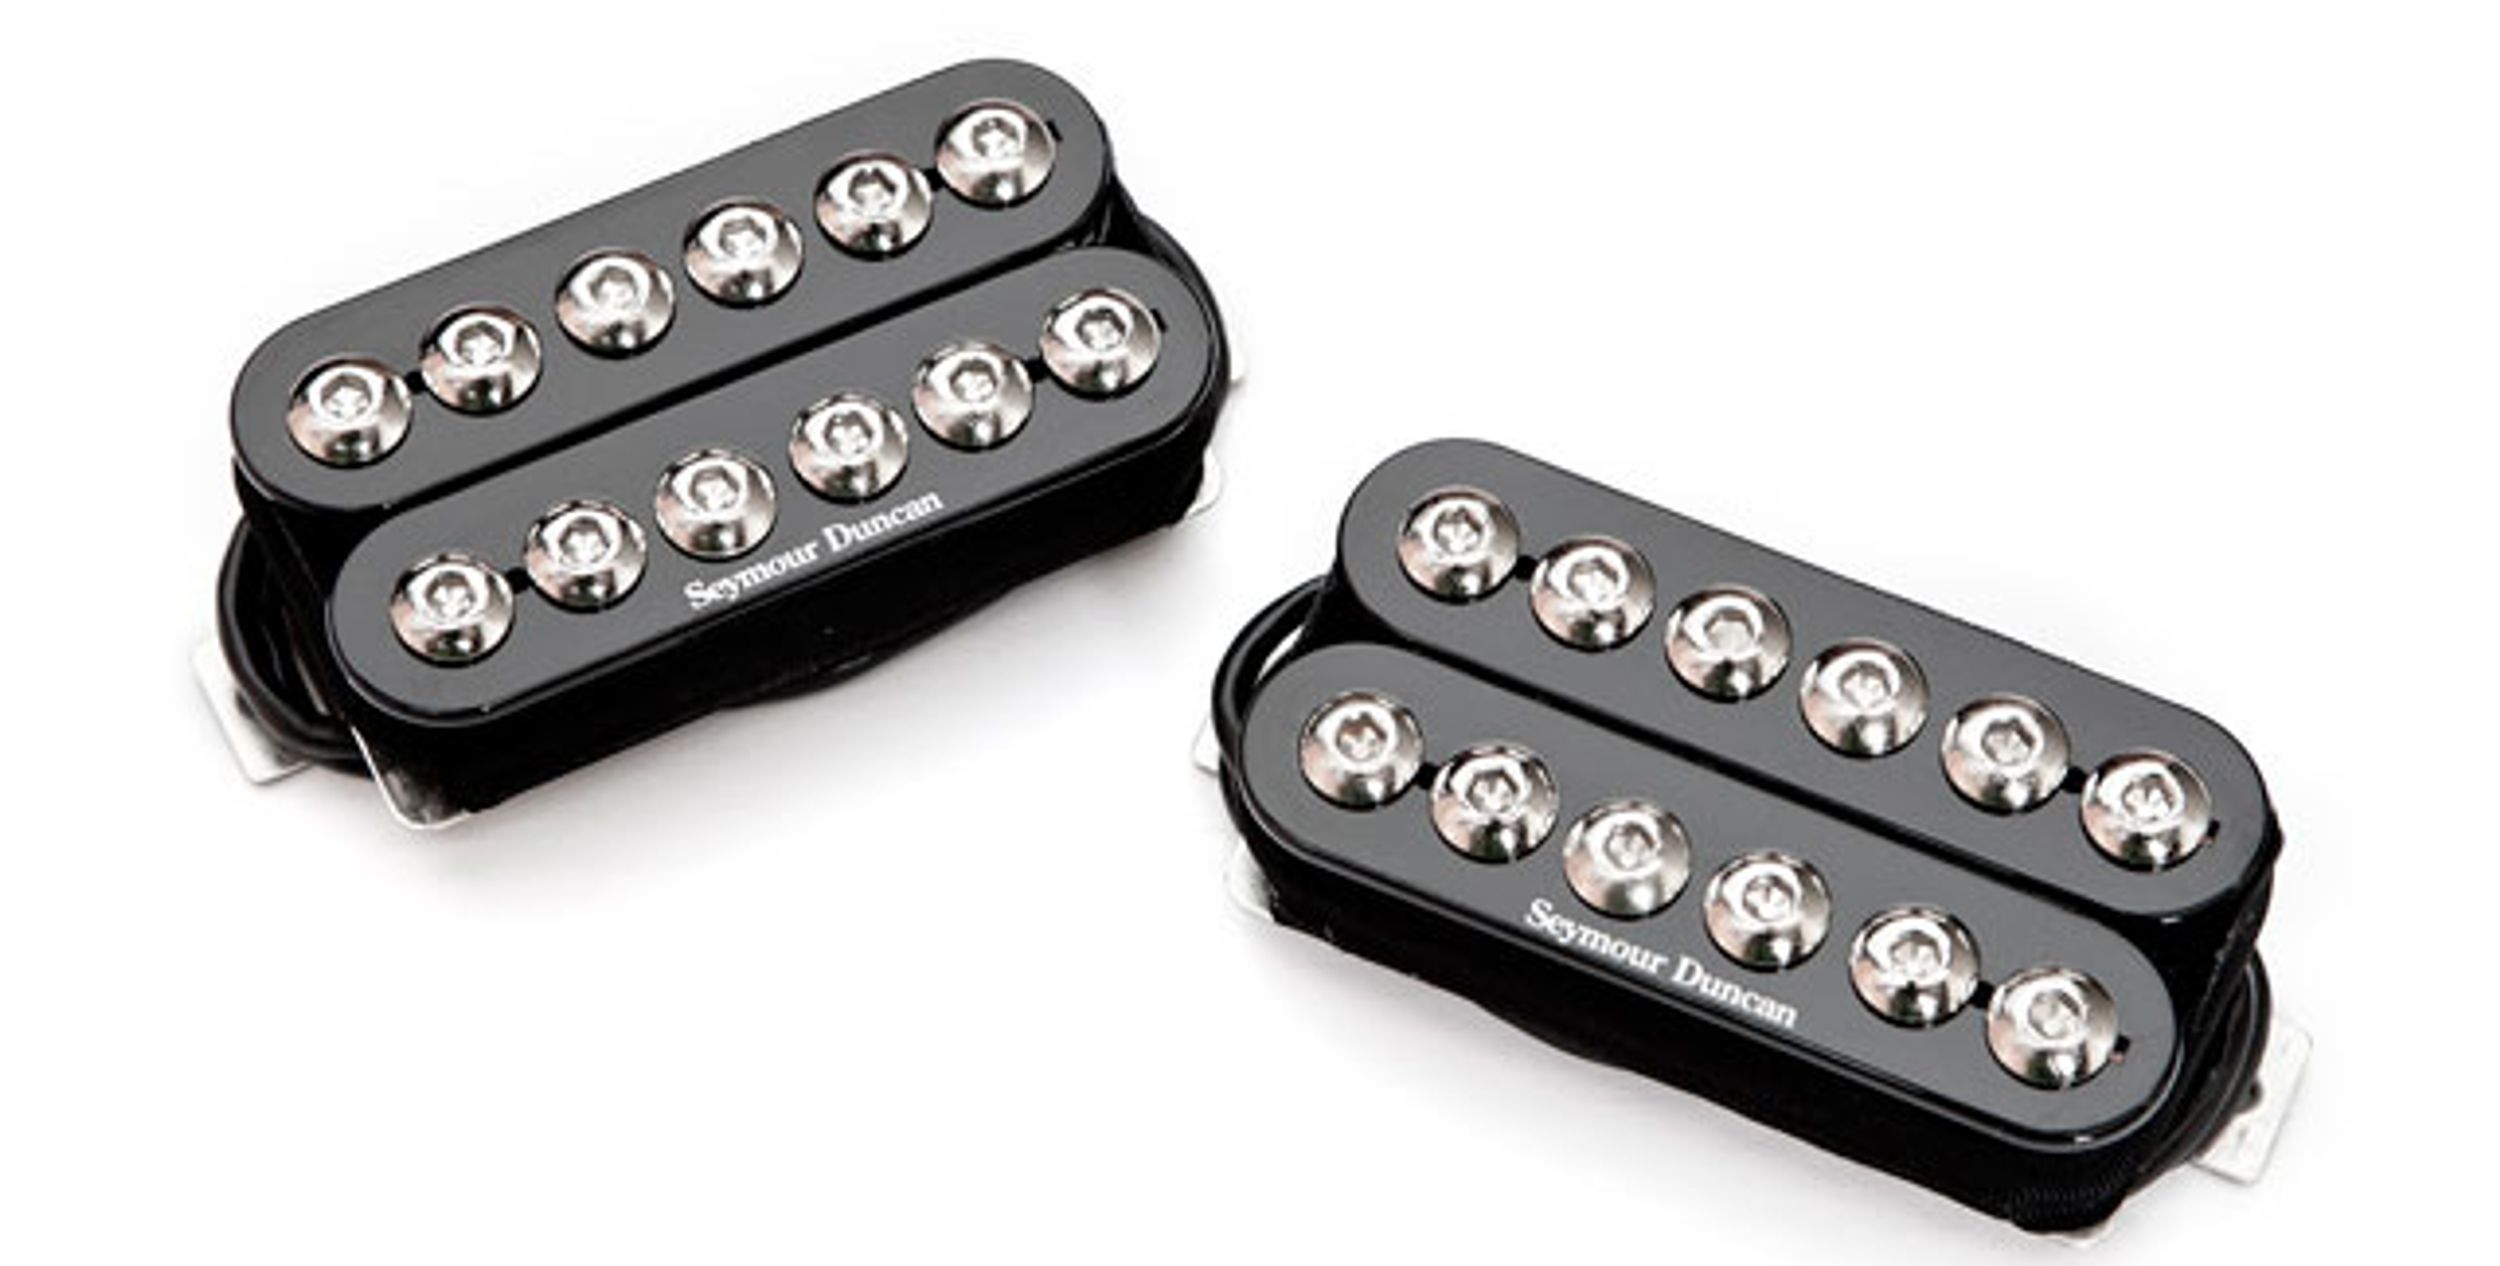 Seymour Duncan Introduces the Synyster Gates Signature Pickups